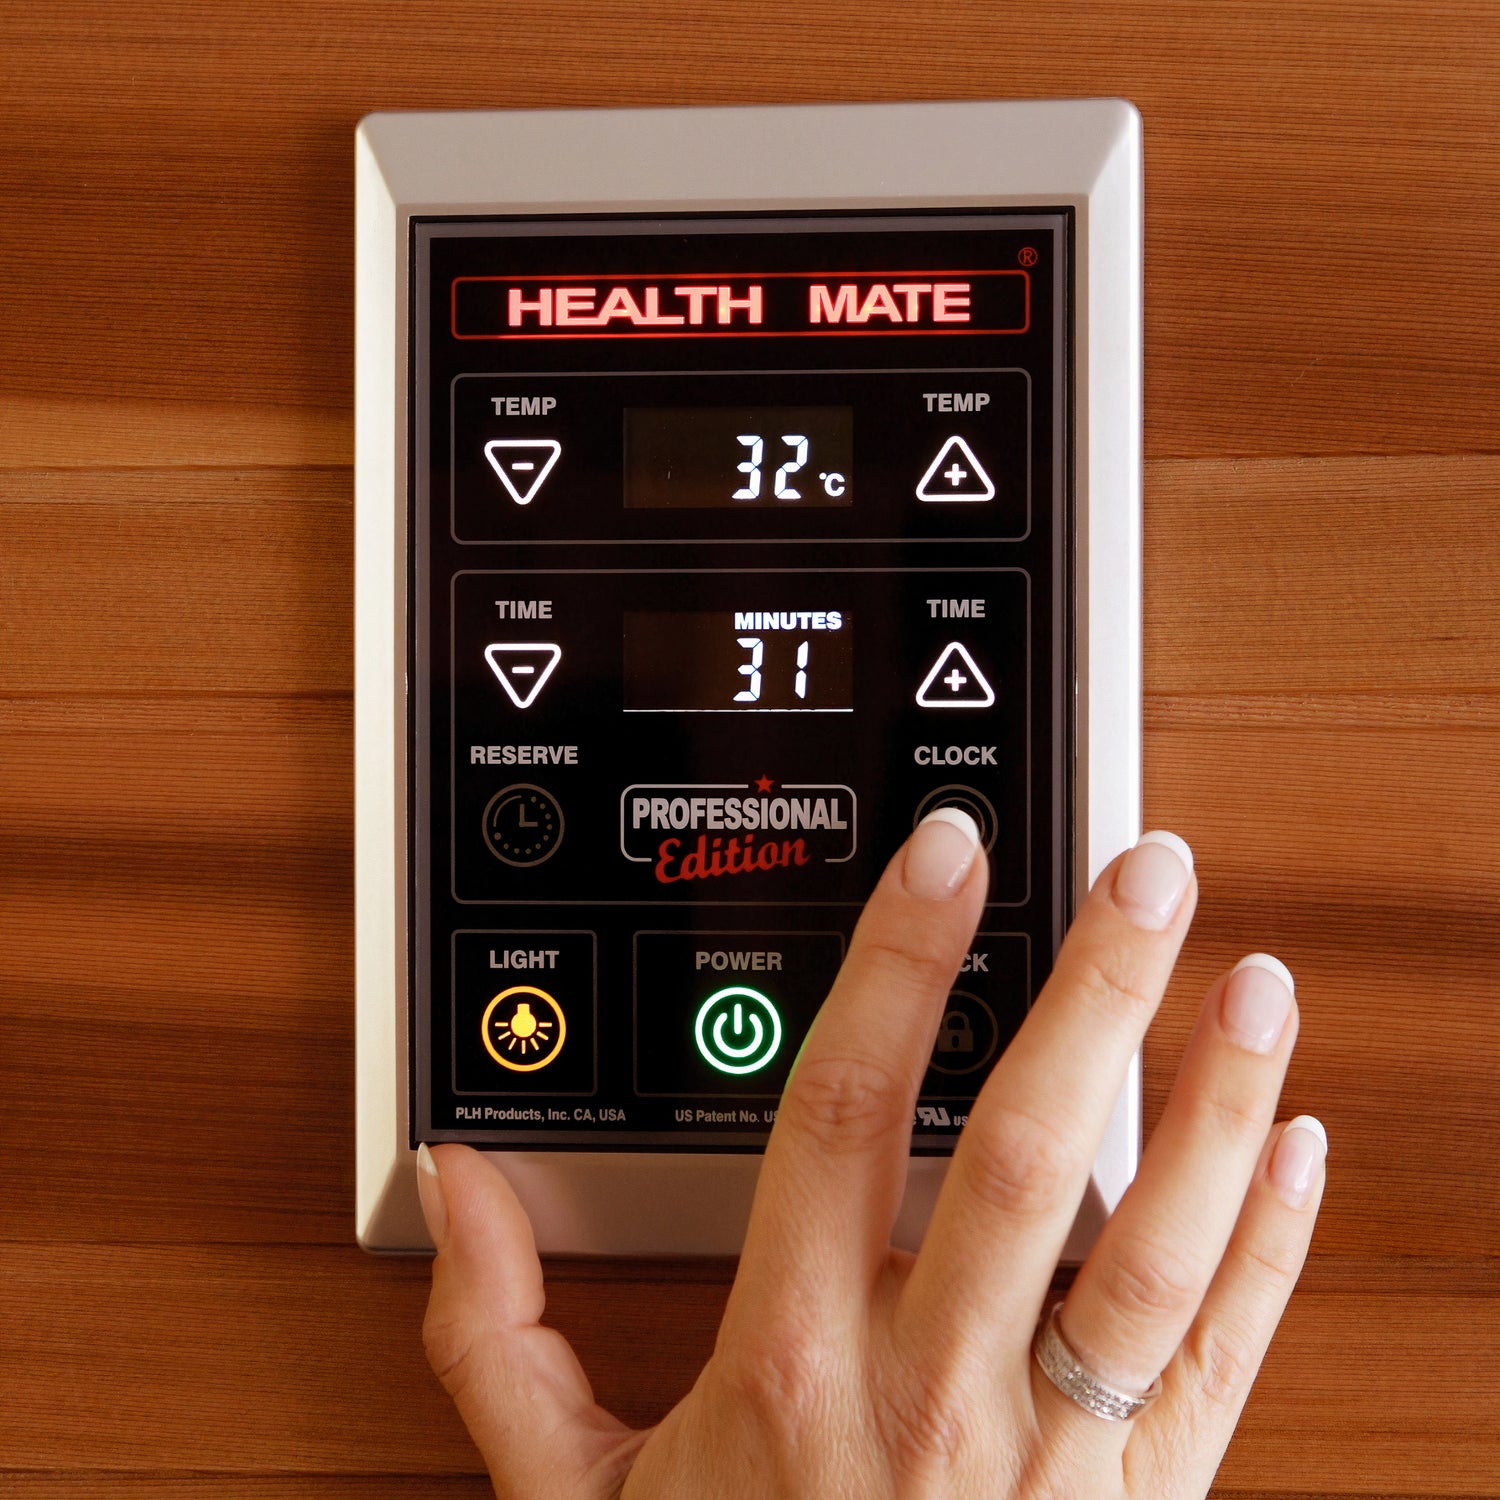 A health mate control panel close up with a female hand on it